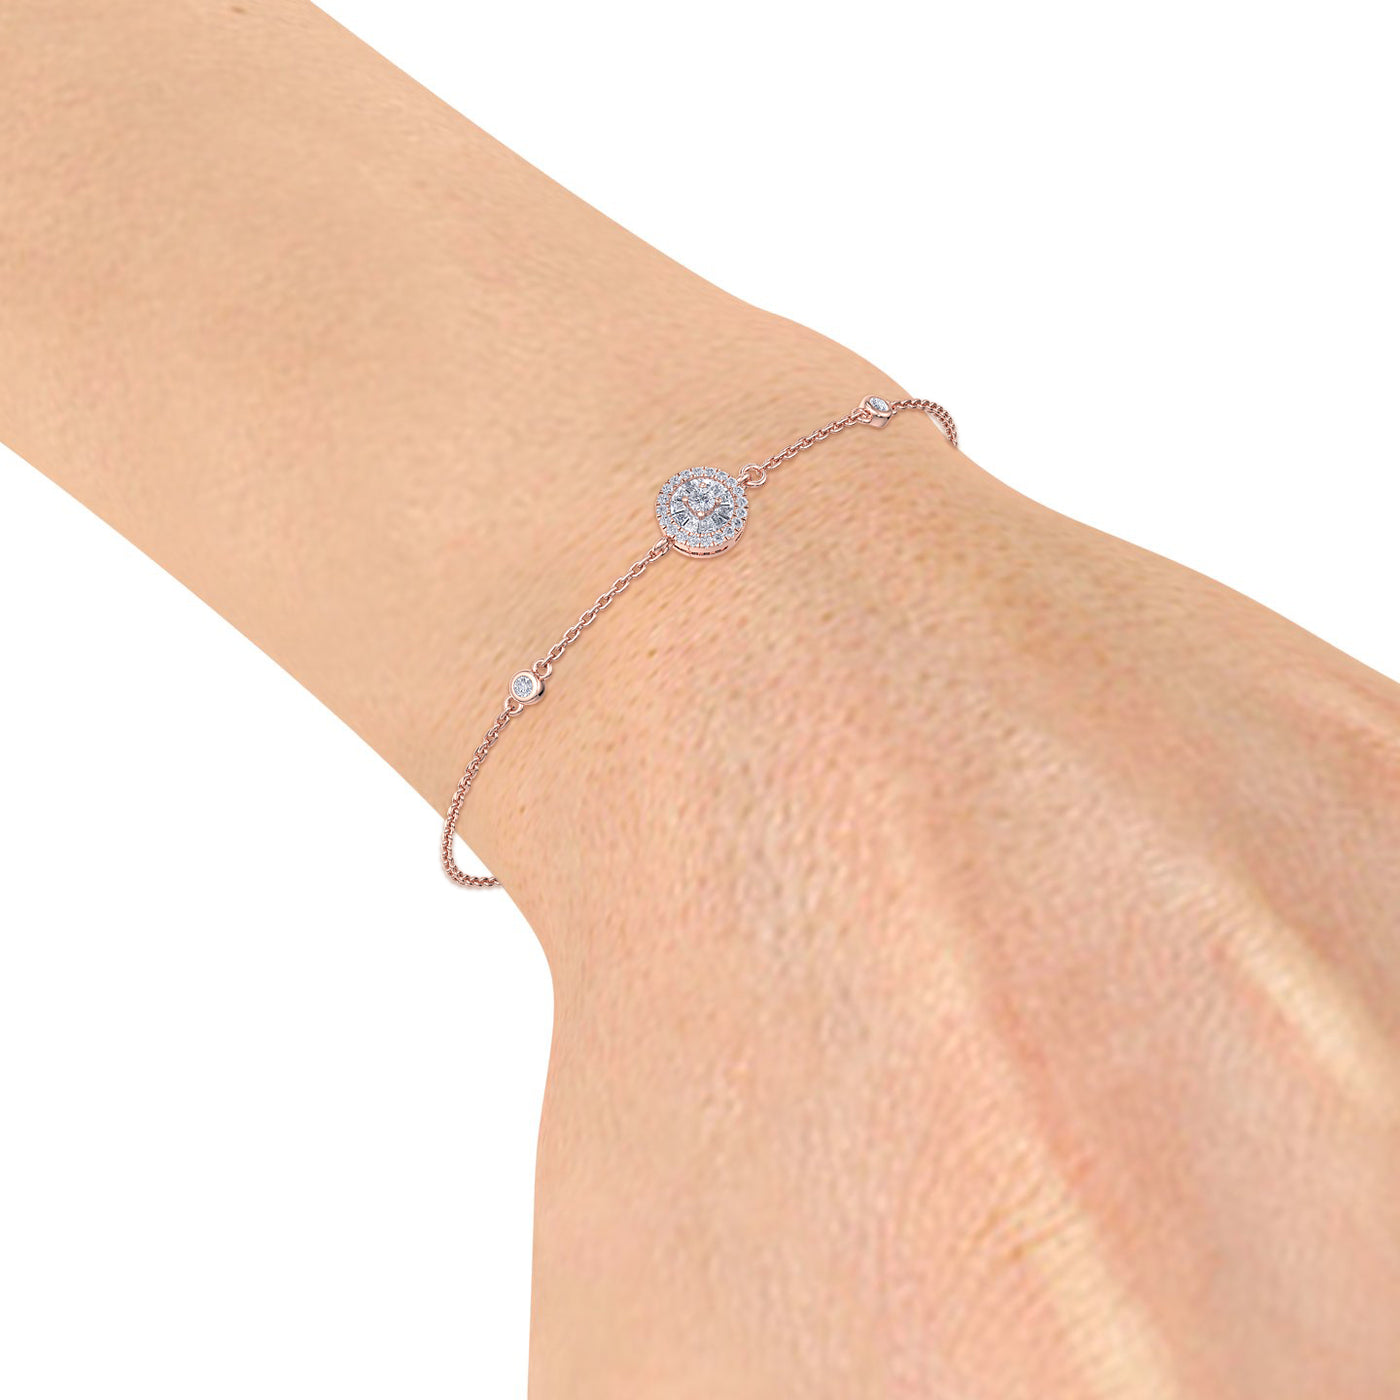 Round shape bracelet in rose gold with white diamonds of 0.15 ct in weight - HER DIAMONDS®